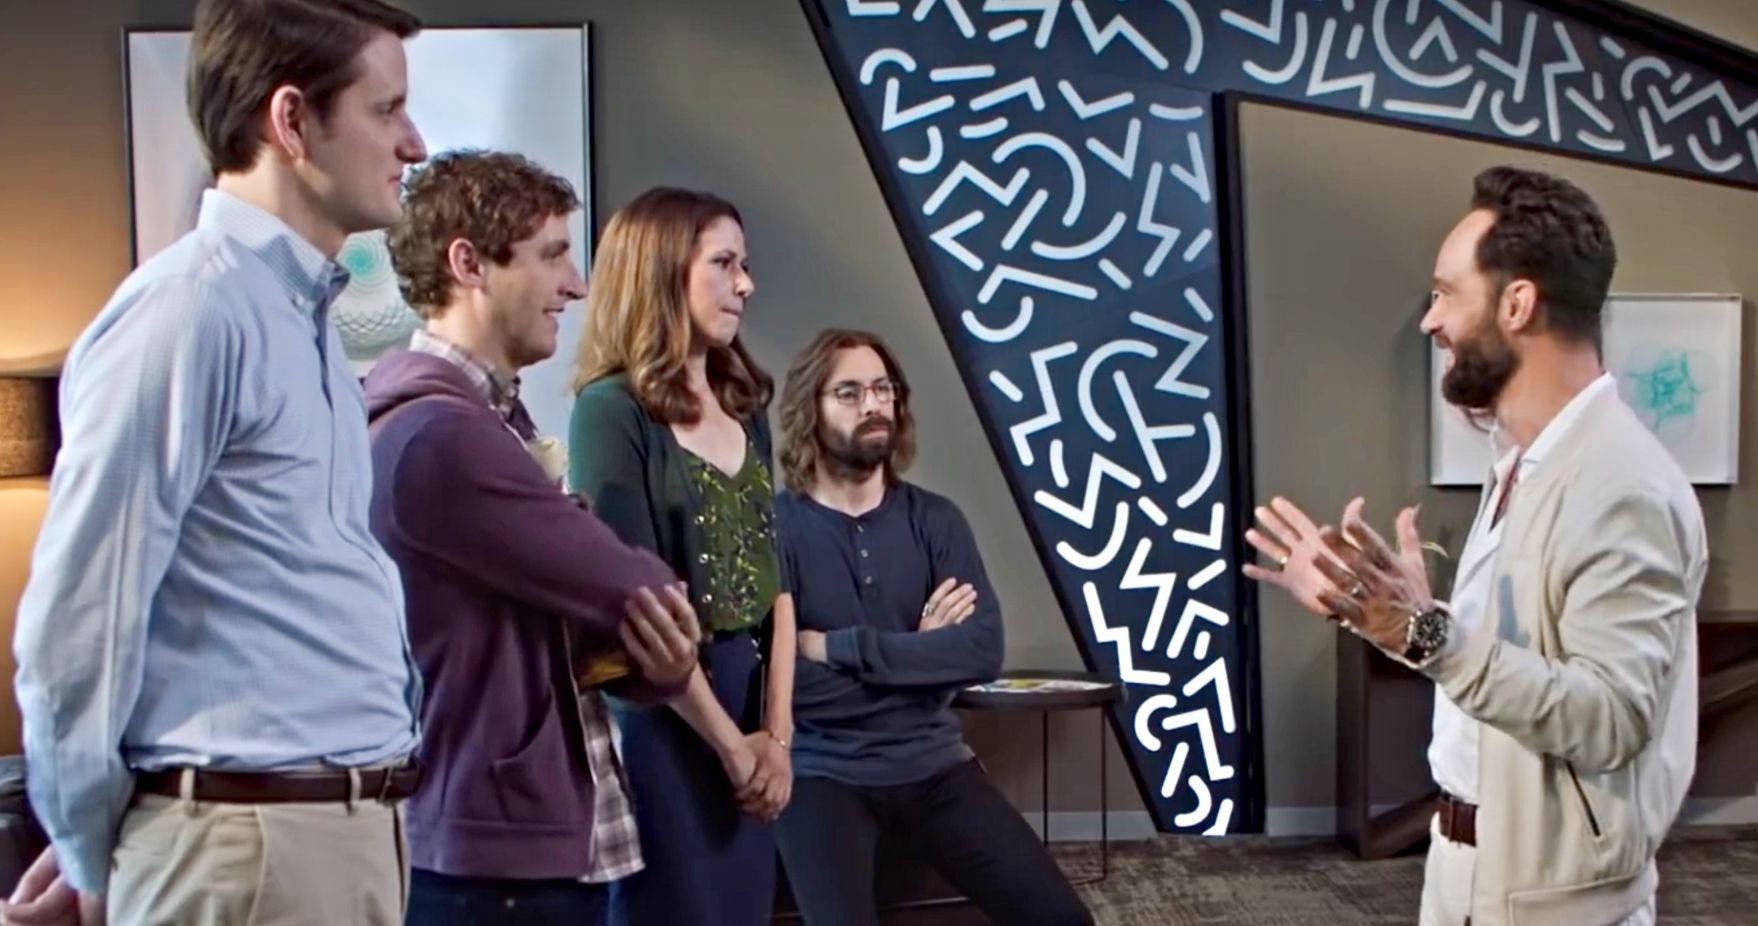 Silicon Valley Season 6 Trailer Teases the End for Pied Piper